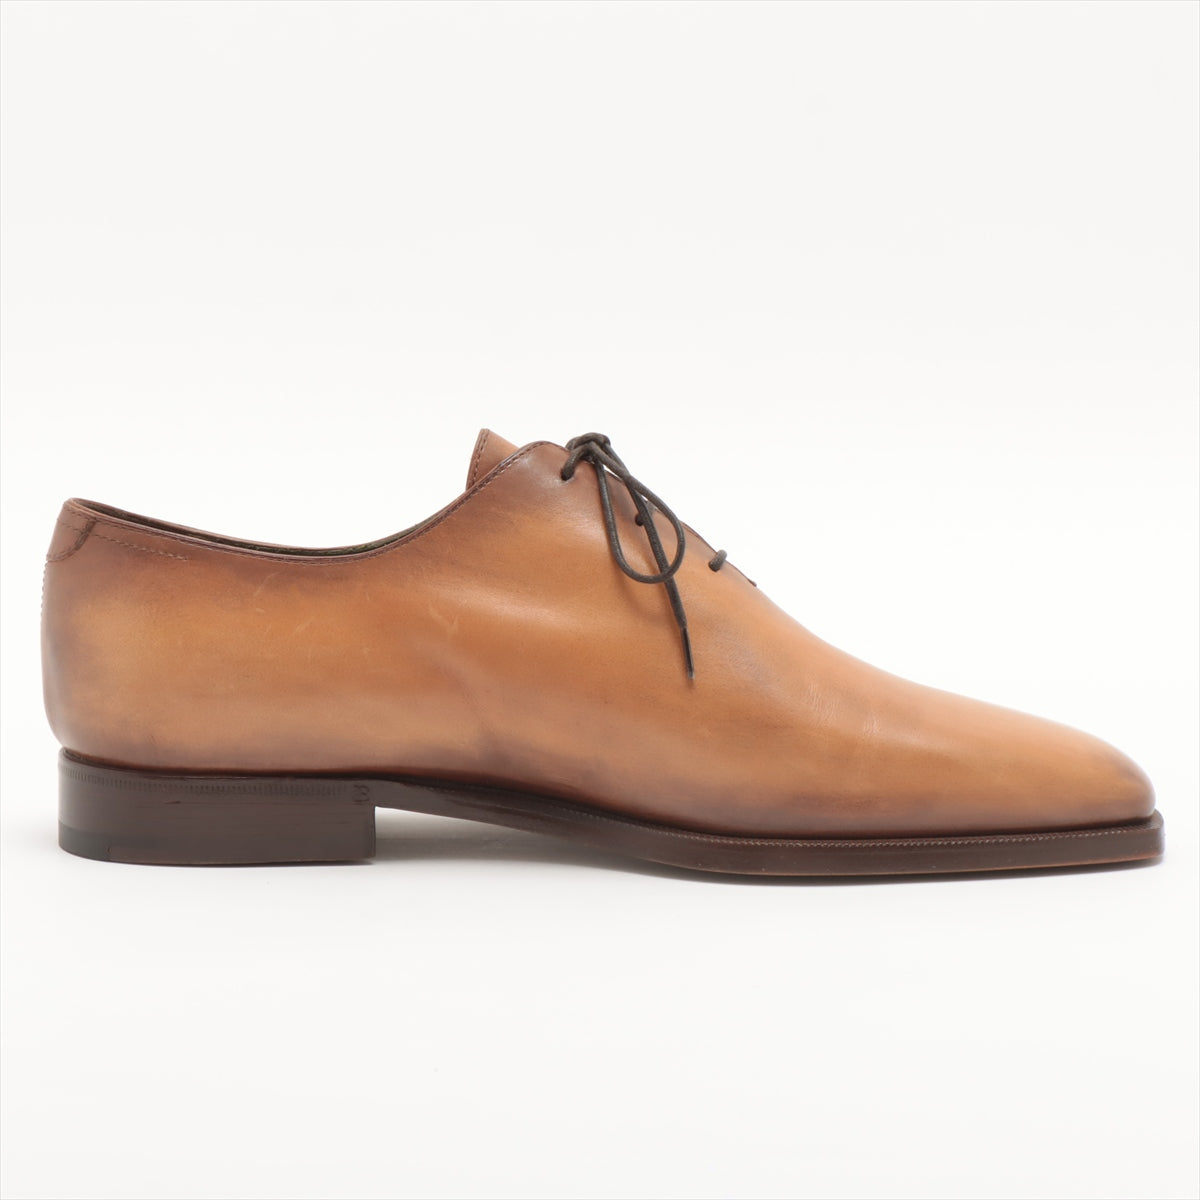 Berluti Alessandro Leather Leather shoes 5 1/2 Men's Brown Comes with a regular shoe tree